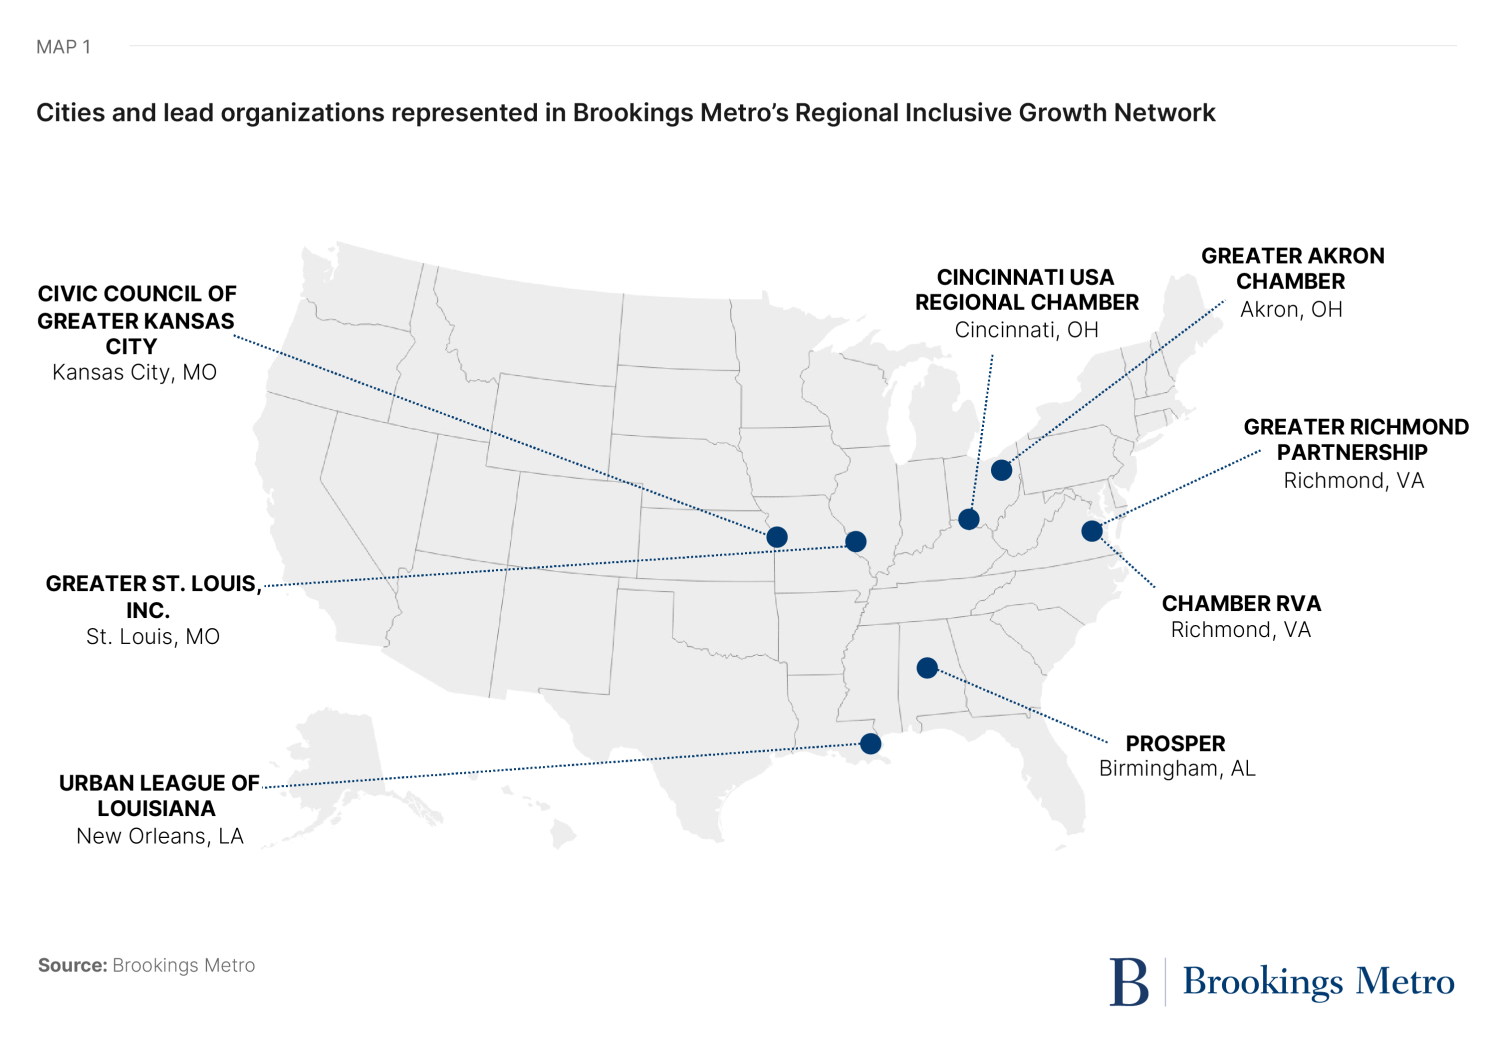 Map 1: Cities and lead organizations represented in Brookings Metro’s Regional Inclusive Growth Network